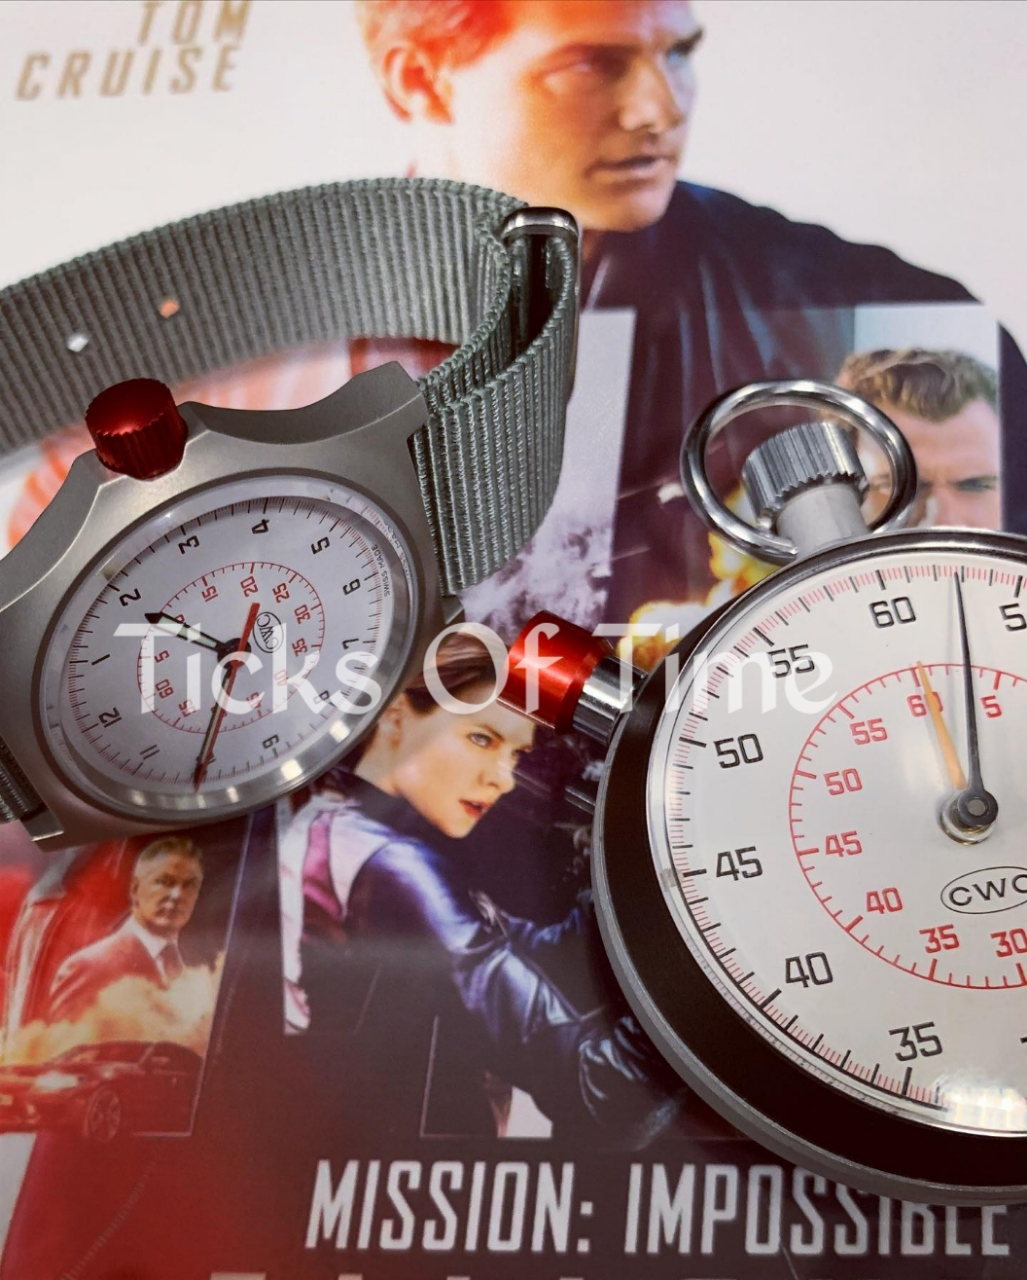 Explore Mission: Impossible Watches Worn By Tom Cruise & Others » Ticks Of Time